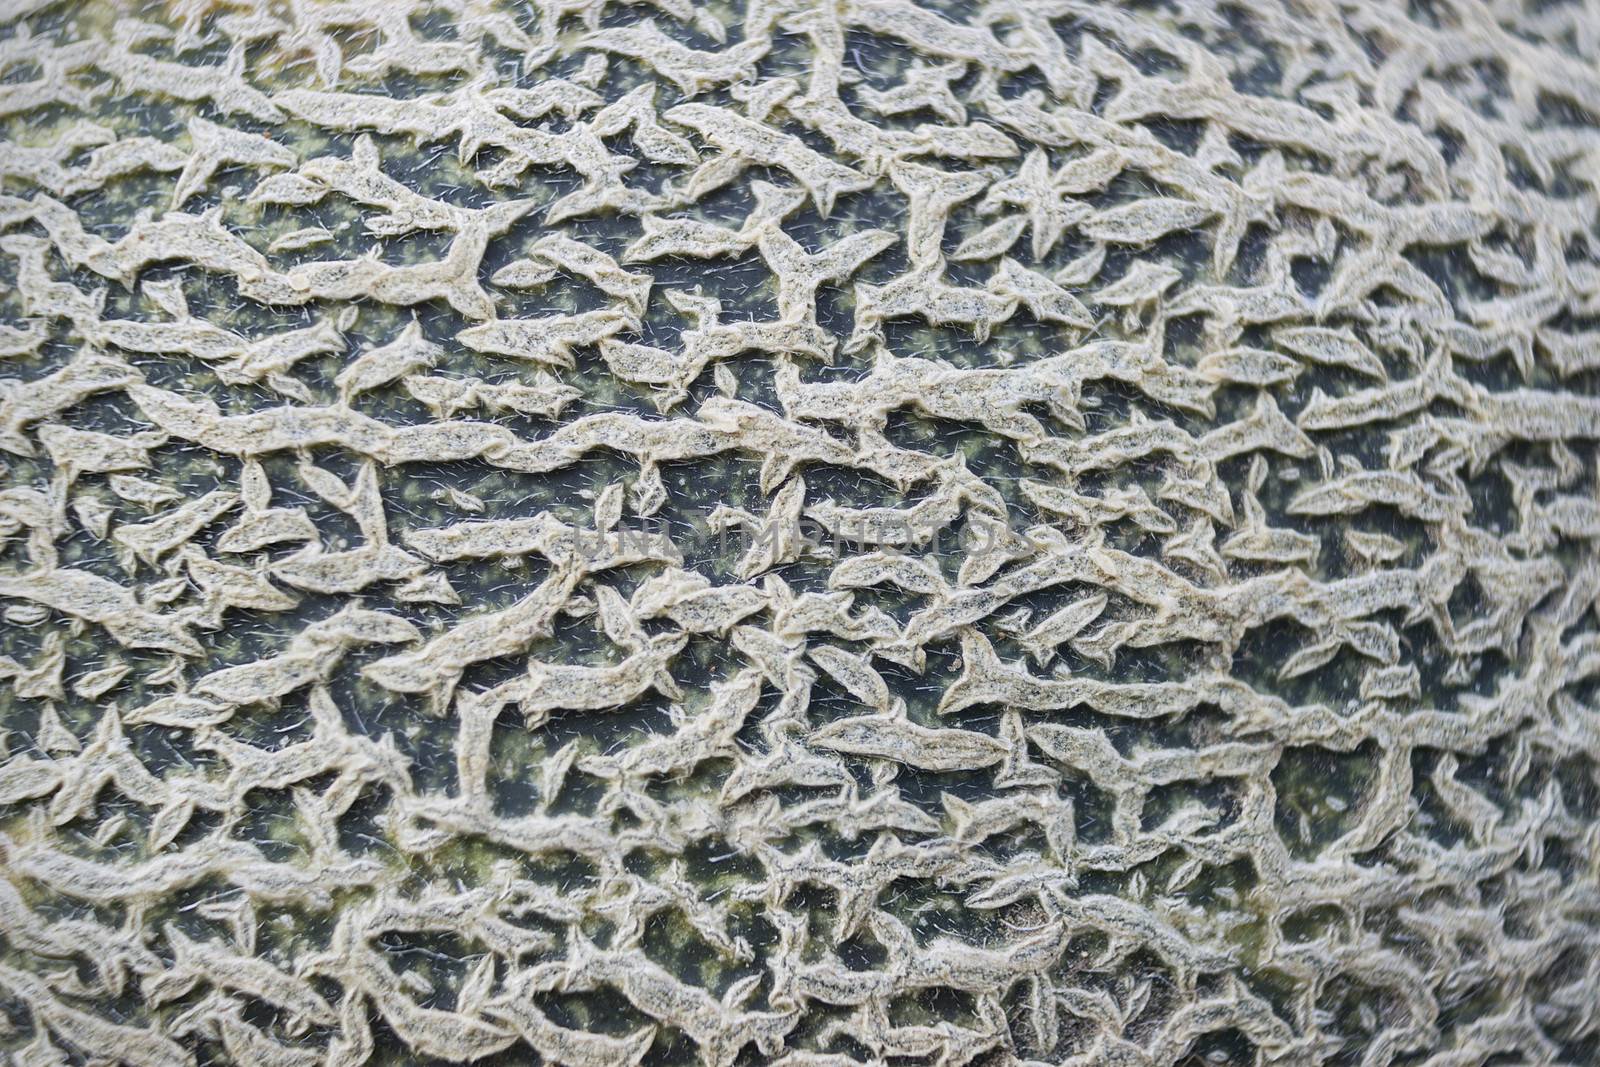 Patterned and rough surface of melon close-up